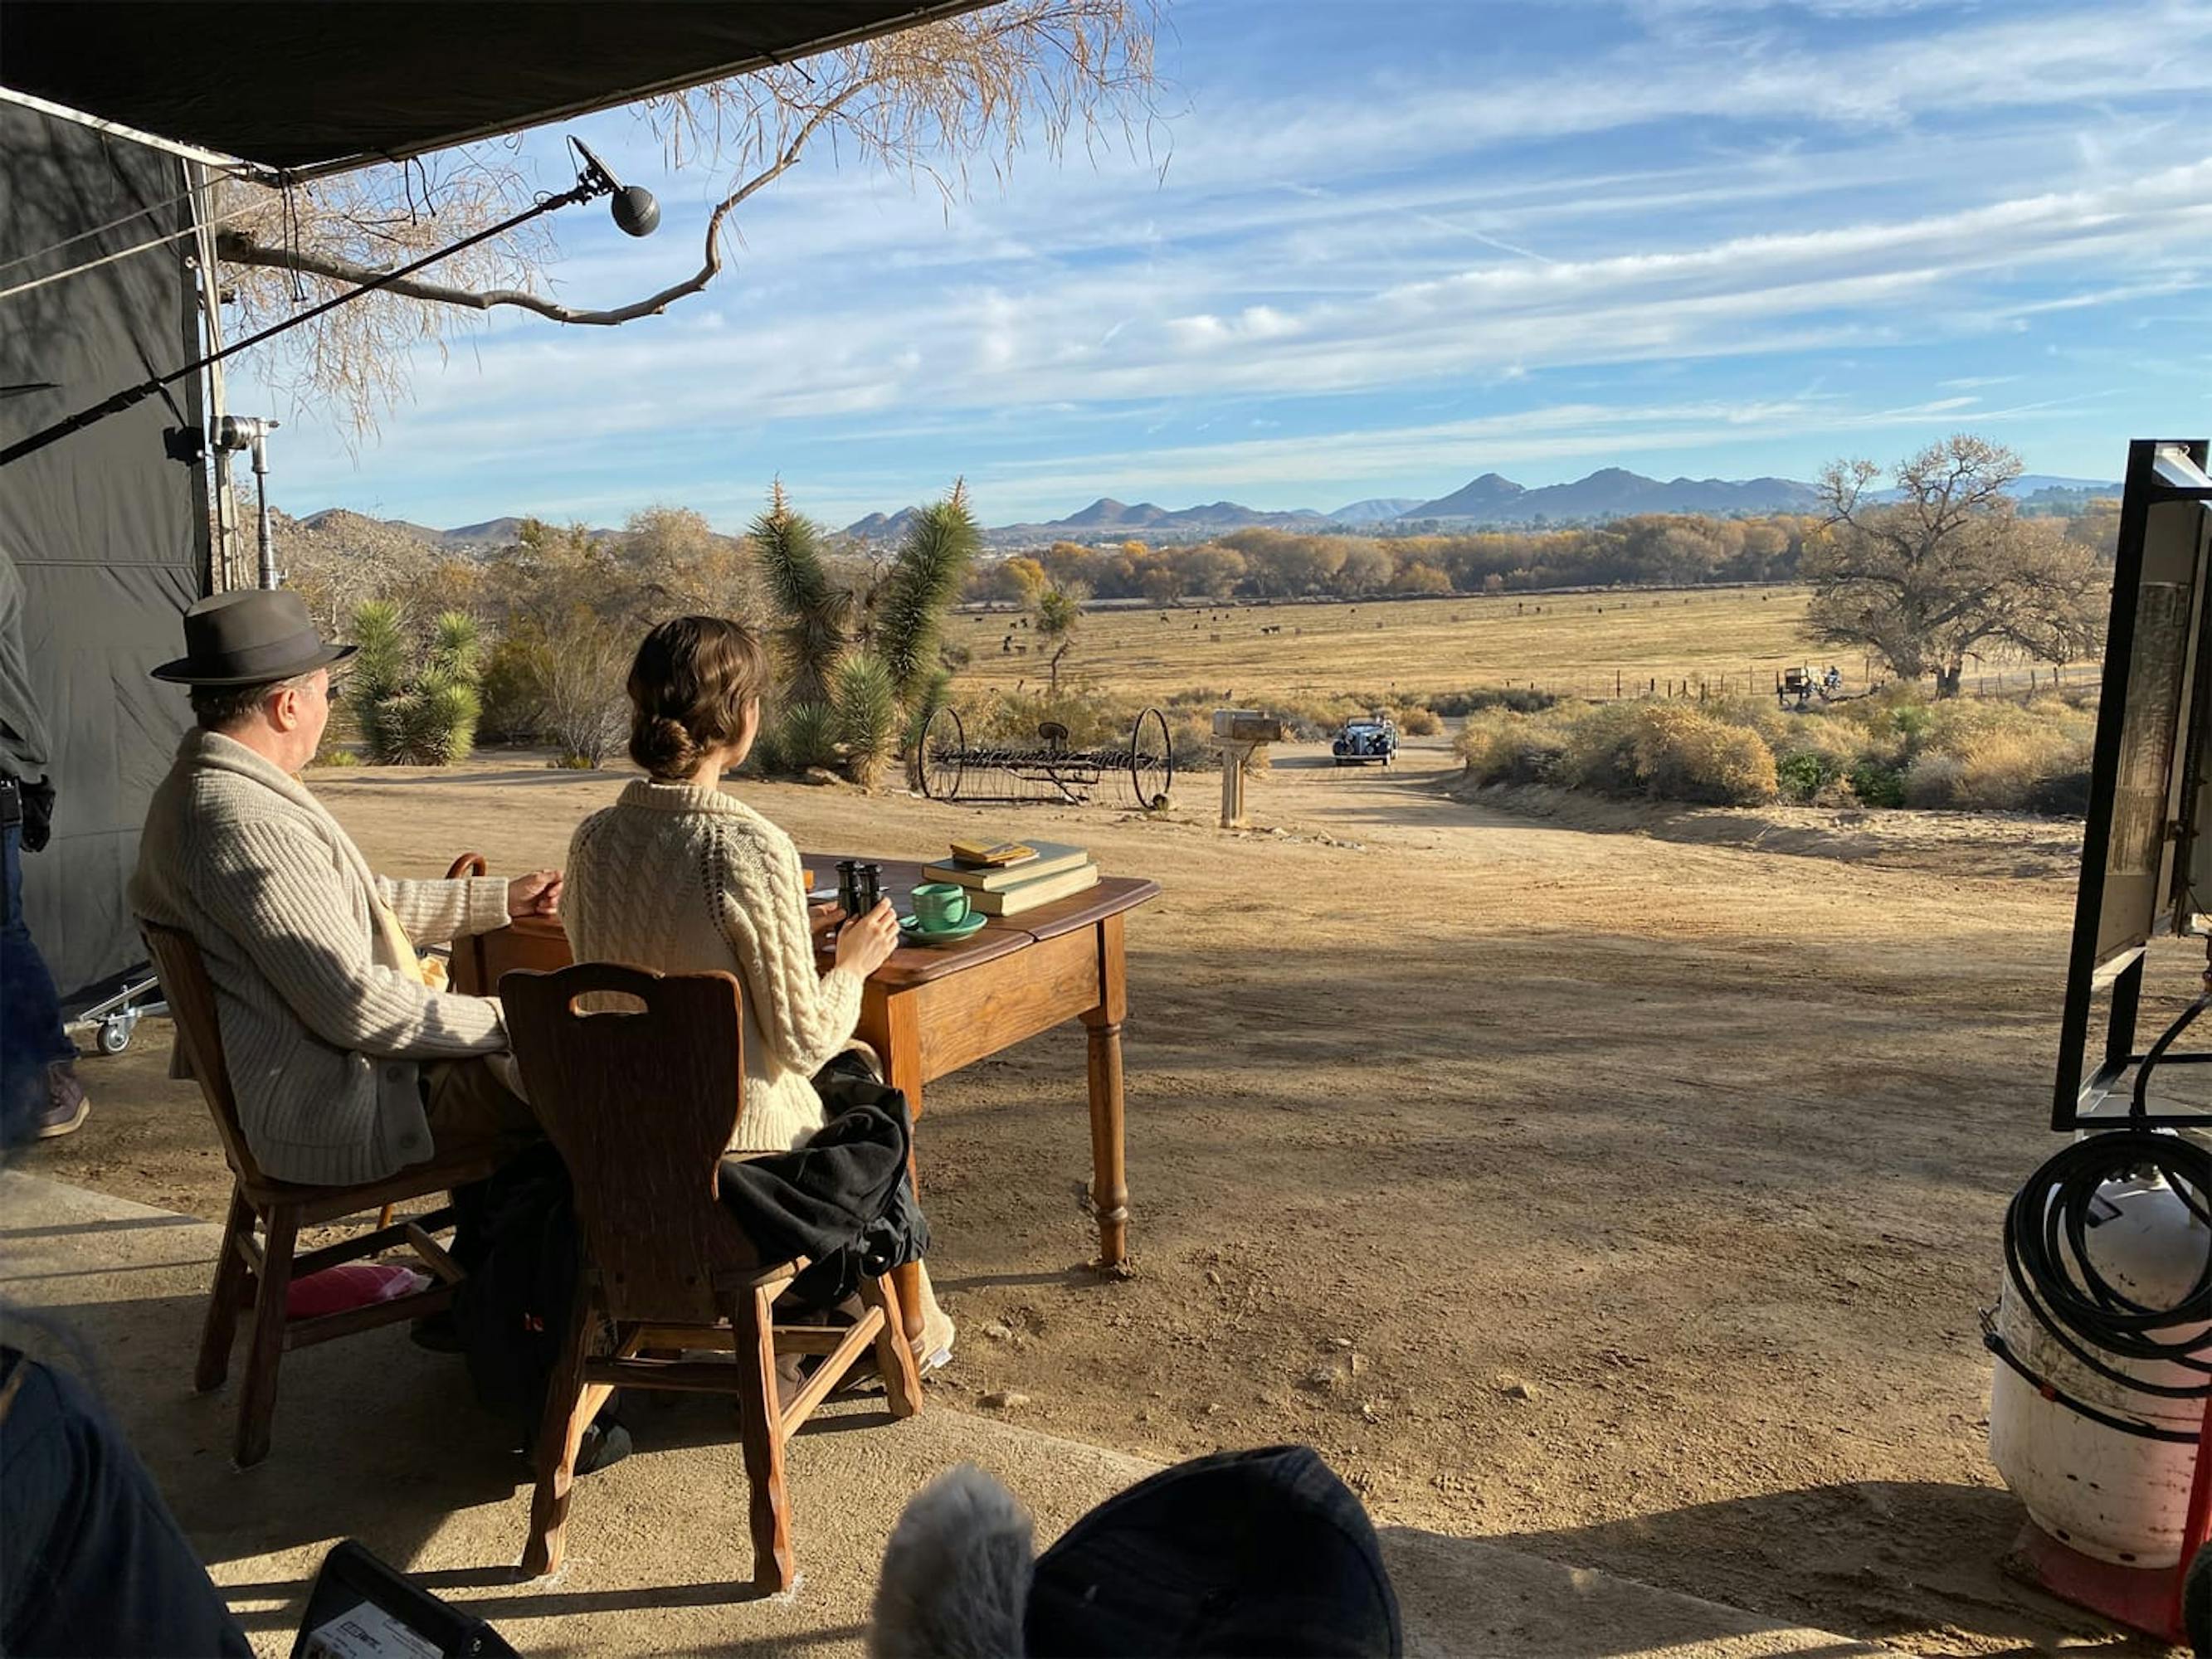 Oldman and Lily Collins in character on the set of Mank. The pair are seated at a table, gazing out at the backdrop that serves as the California desert. The sky is a bright blue and the expanse in front of them is a dusty yellow.